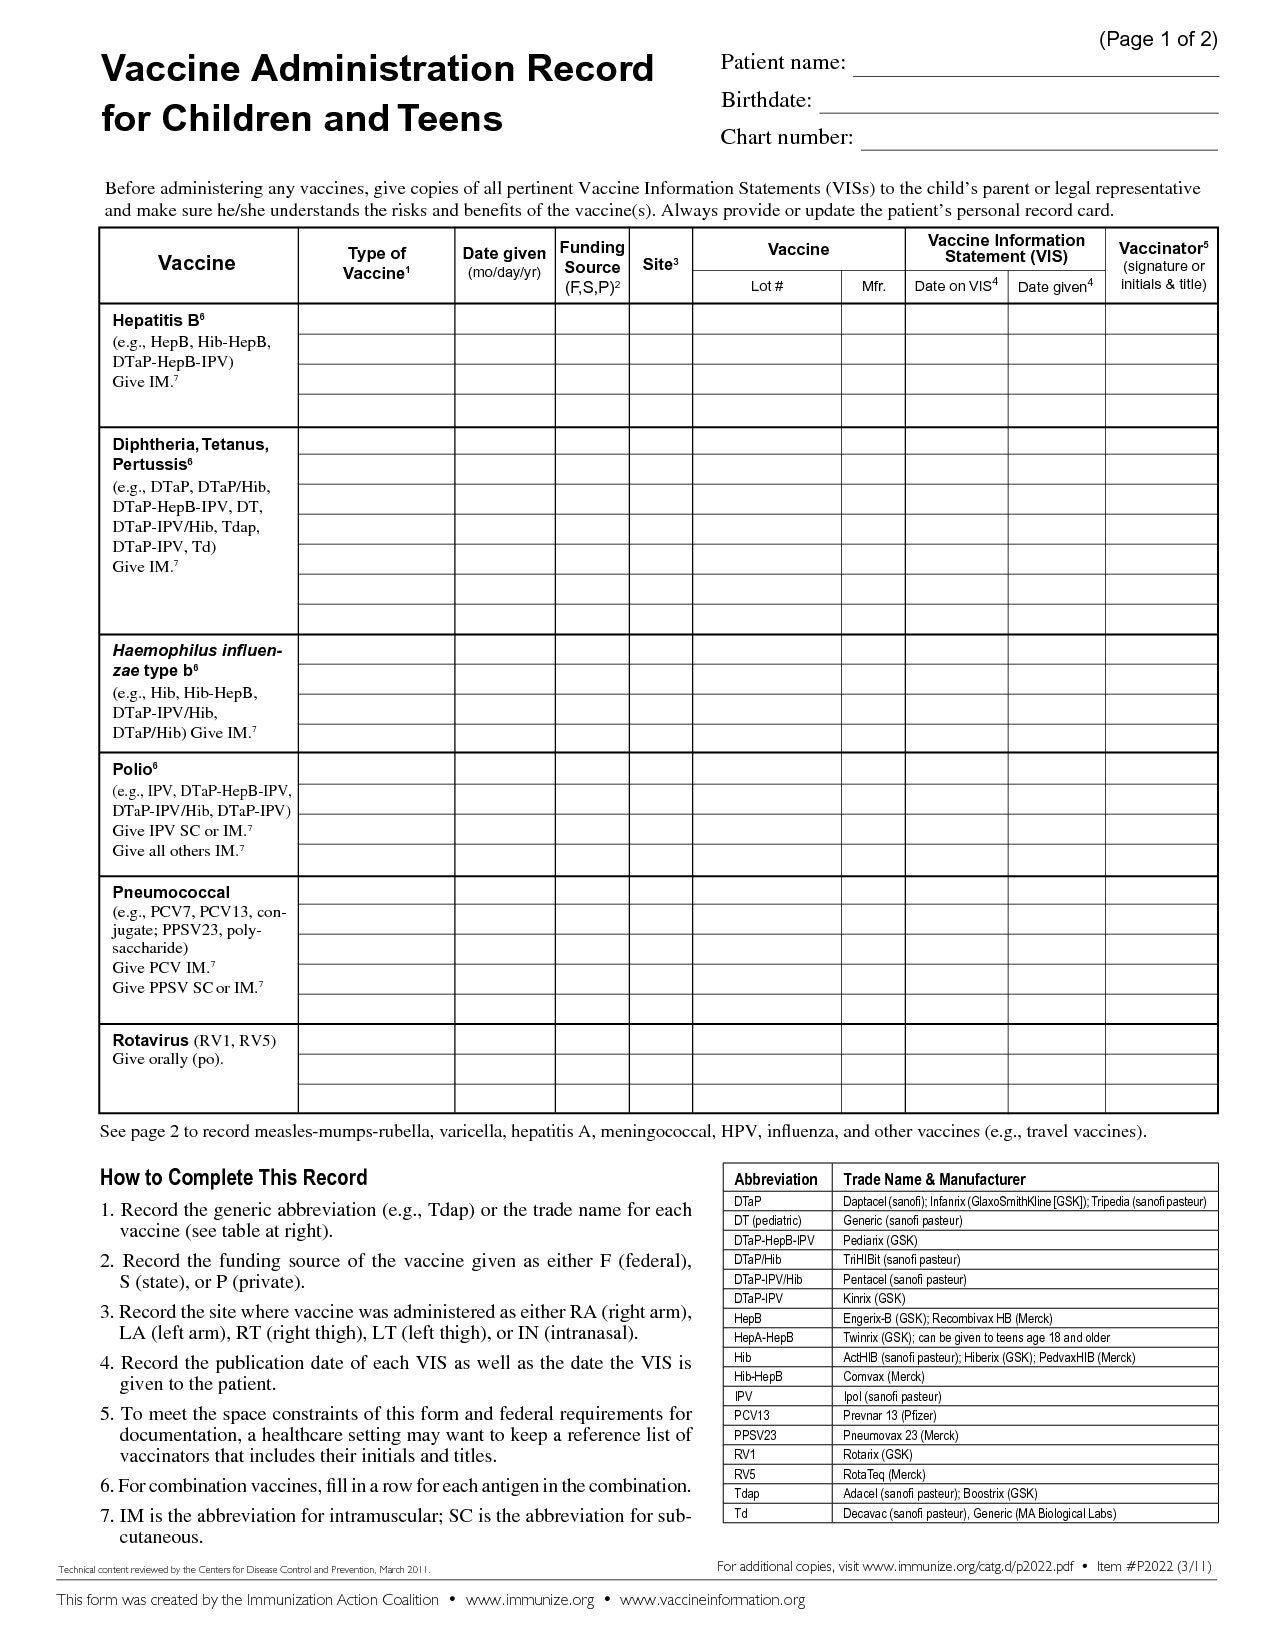 dog-vaccination-record-template-printable-dog-vaccination-record-free